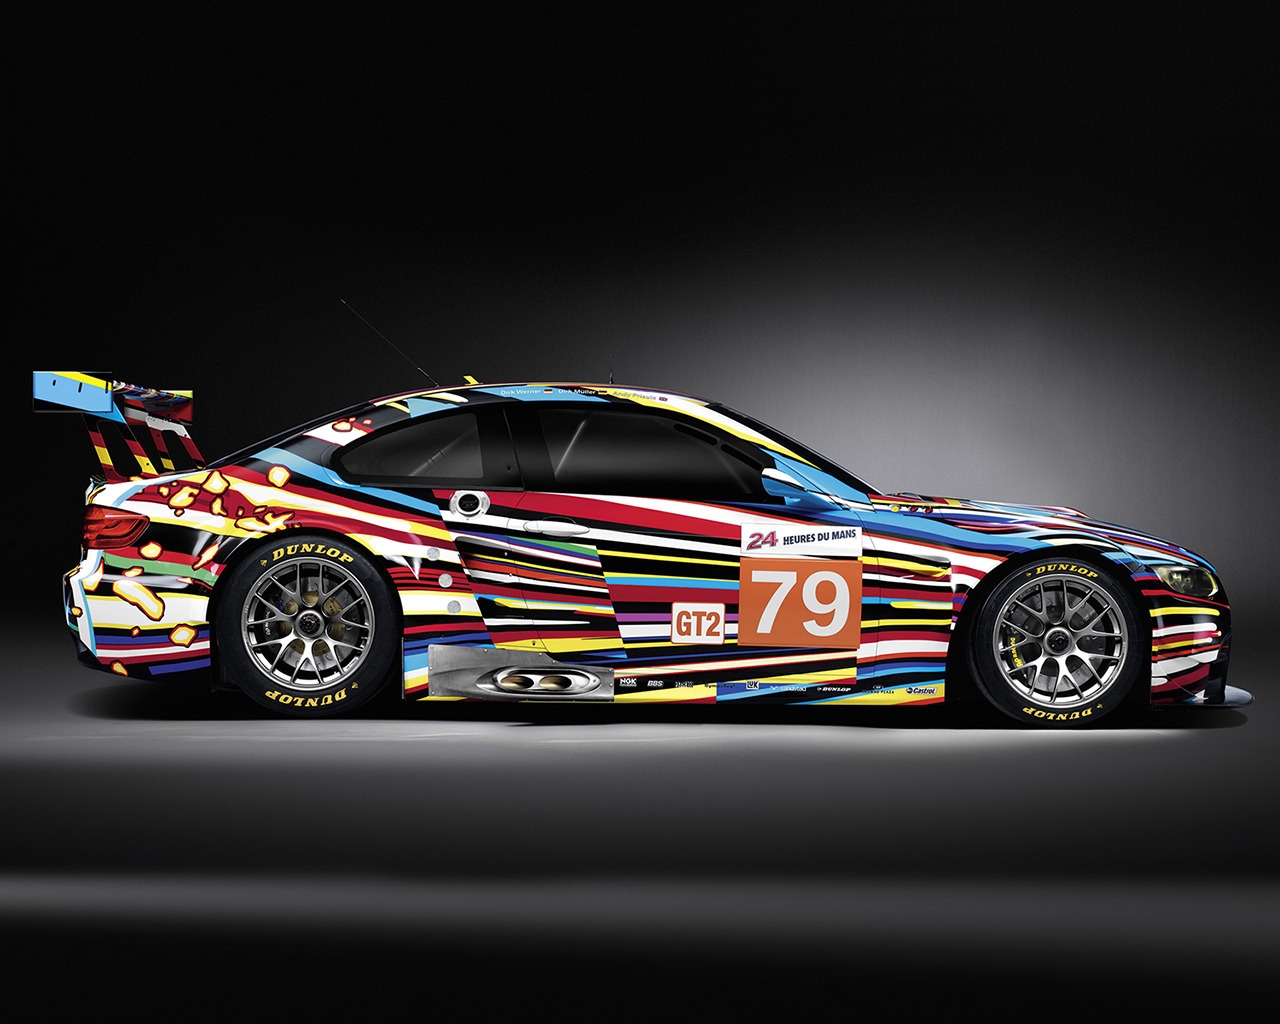 BMW M3 GT 2 Art Side for 1280 x 1024 resolution